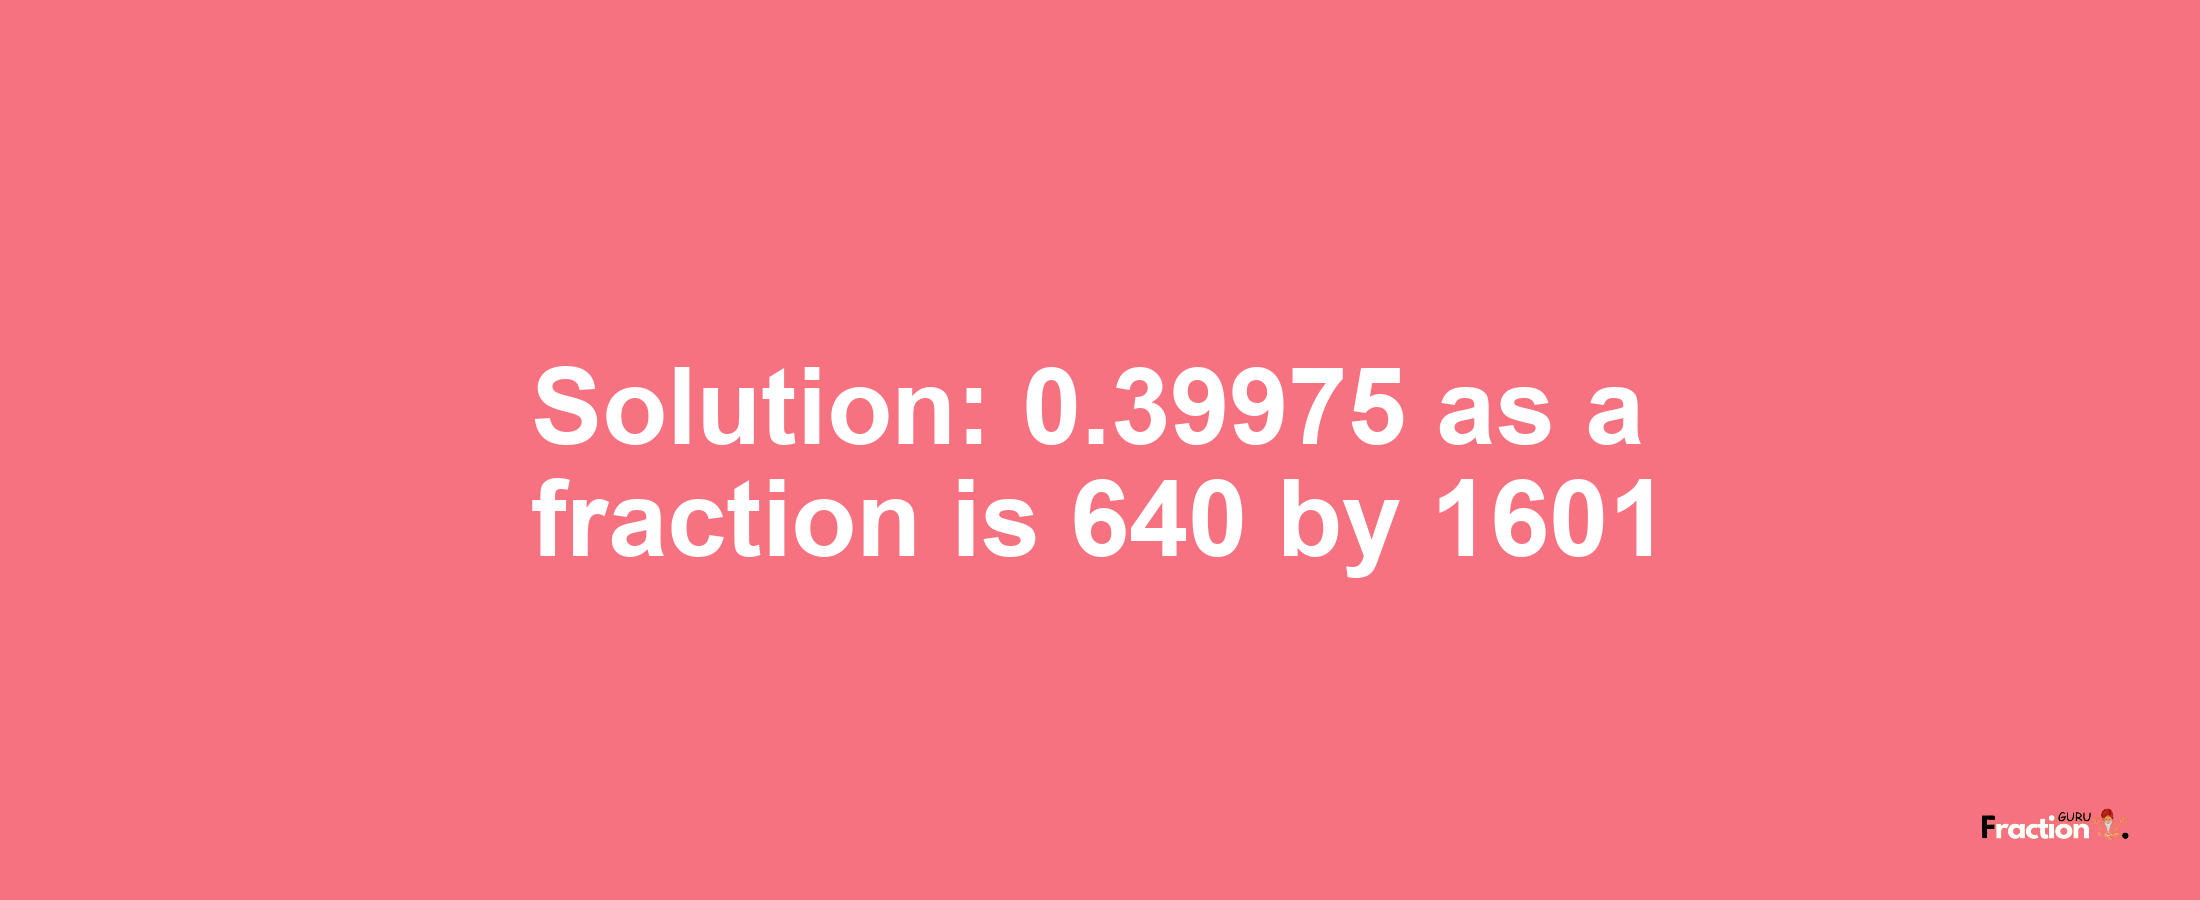 Solution:0.39975 as a fraction is 640/1601